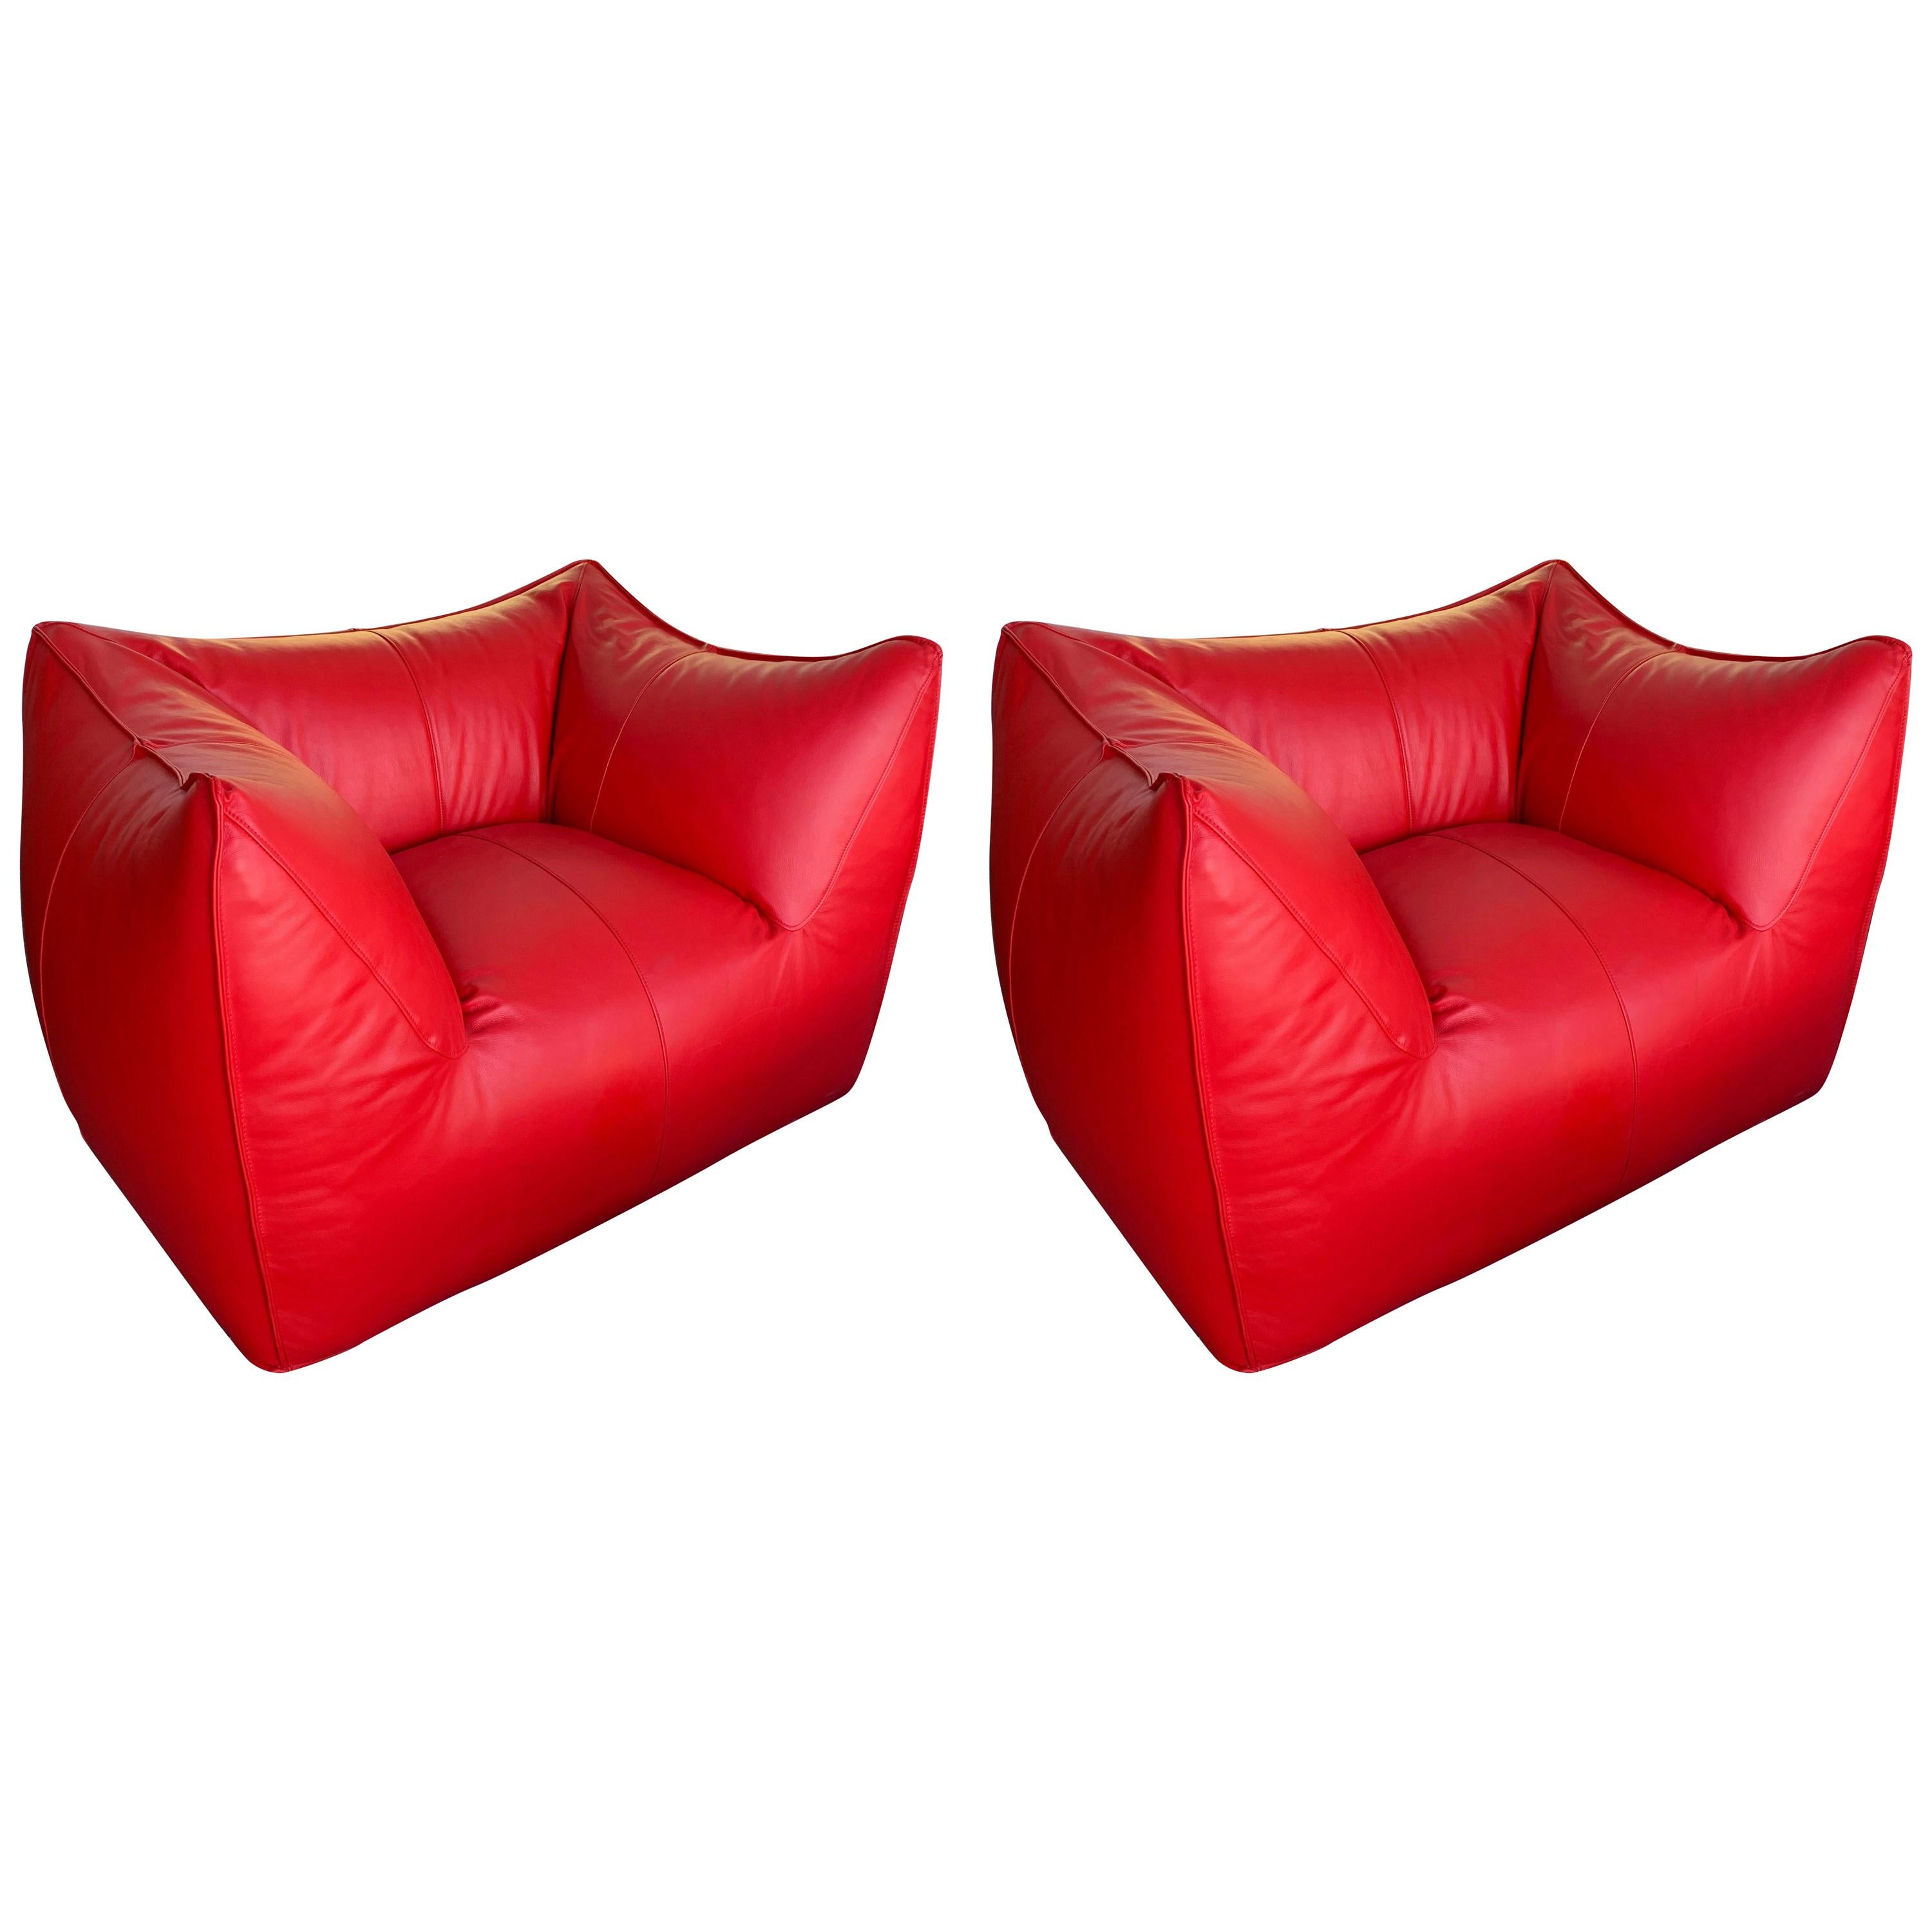 Le Bambole Armchairs Red Leather by Mario Bellini for B&B Italia, 1970s